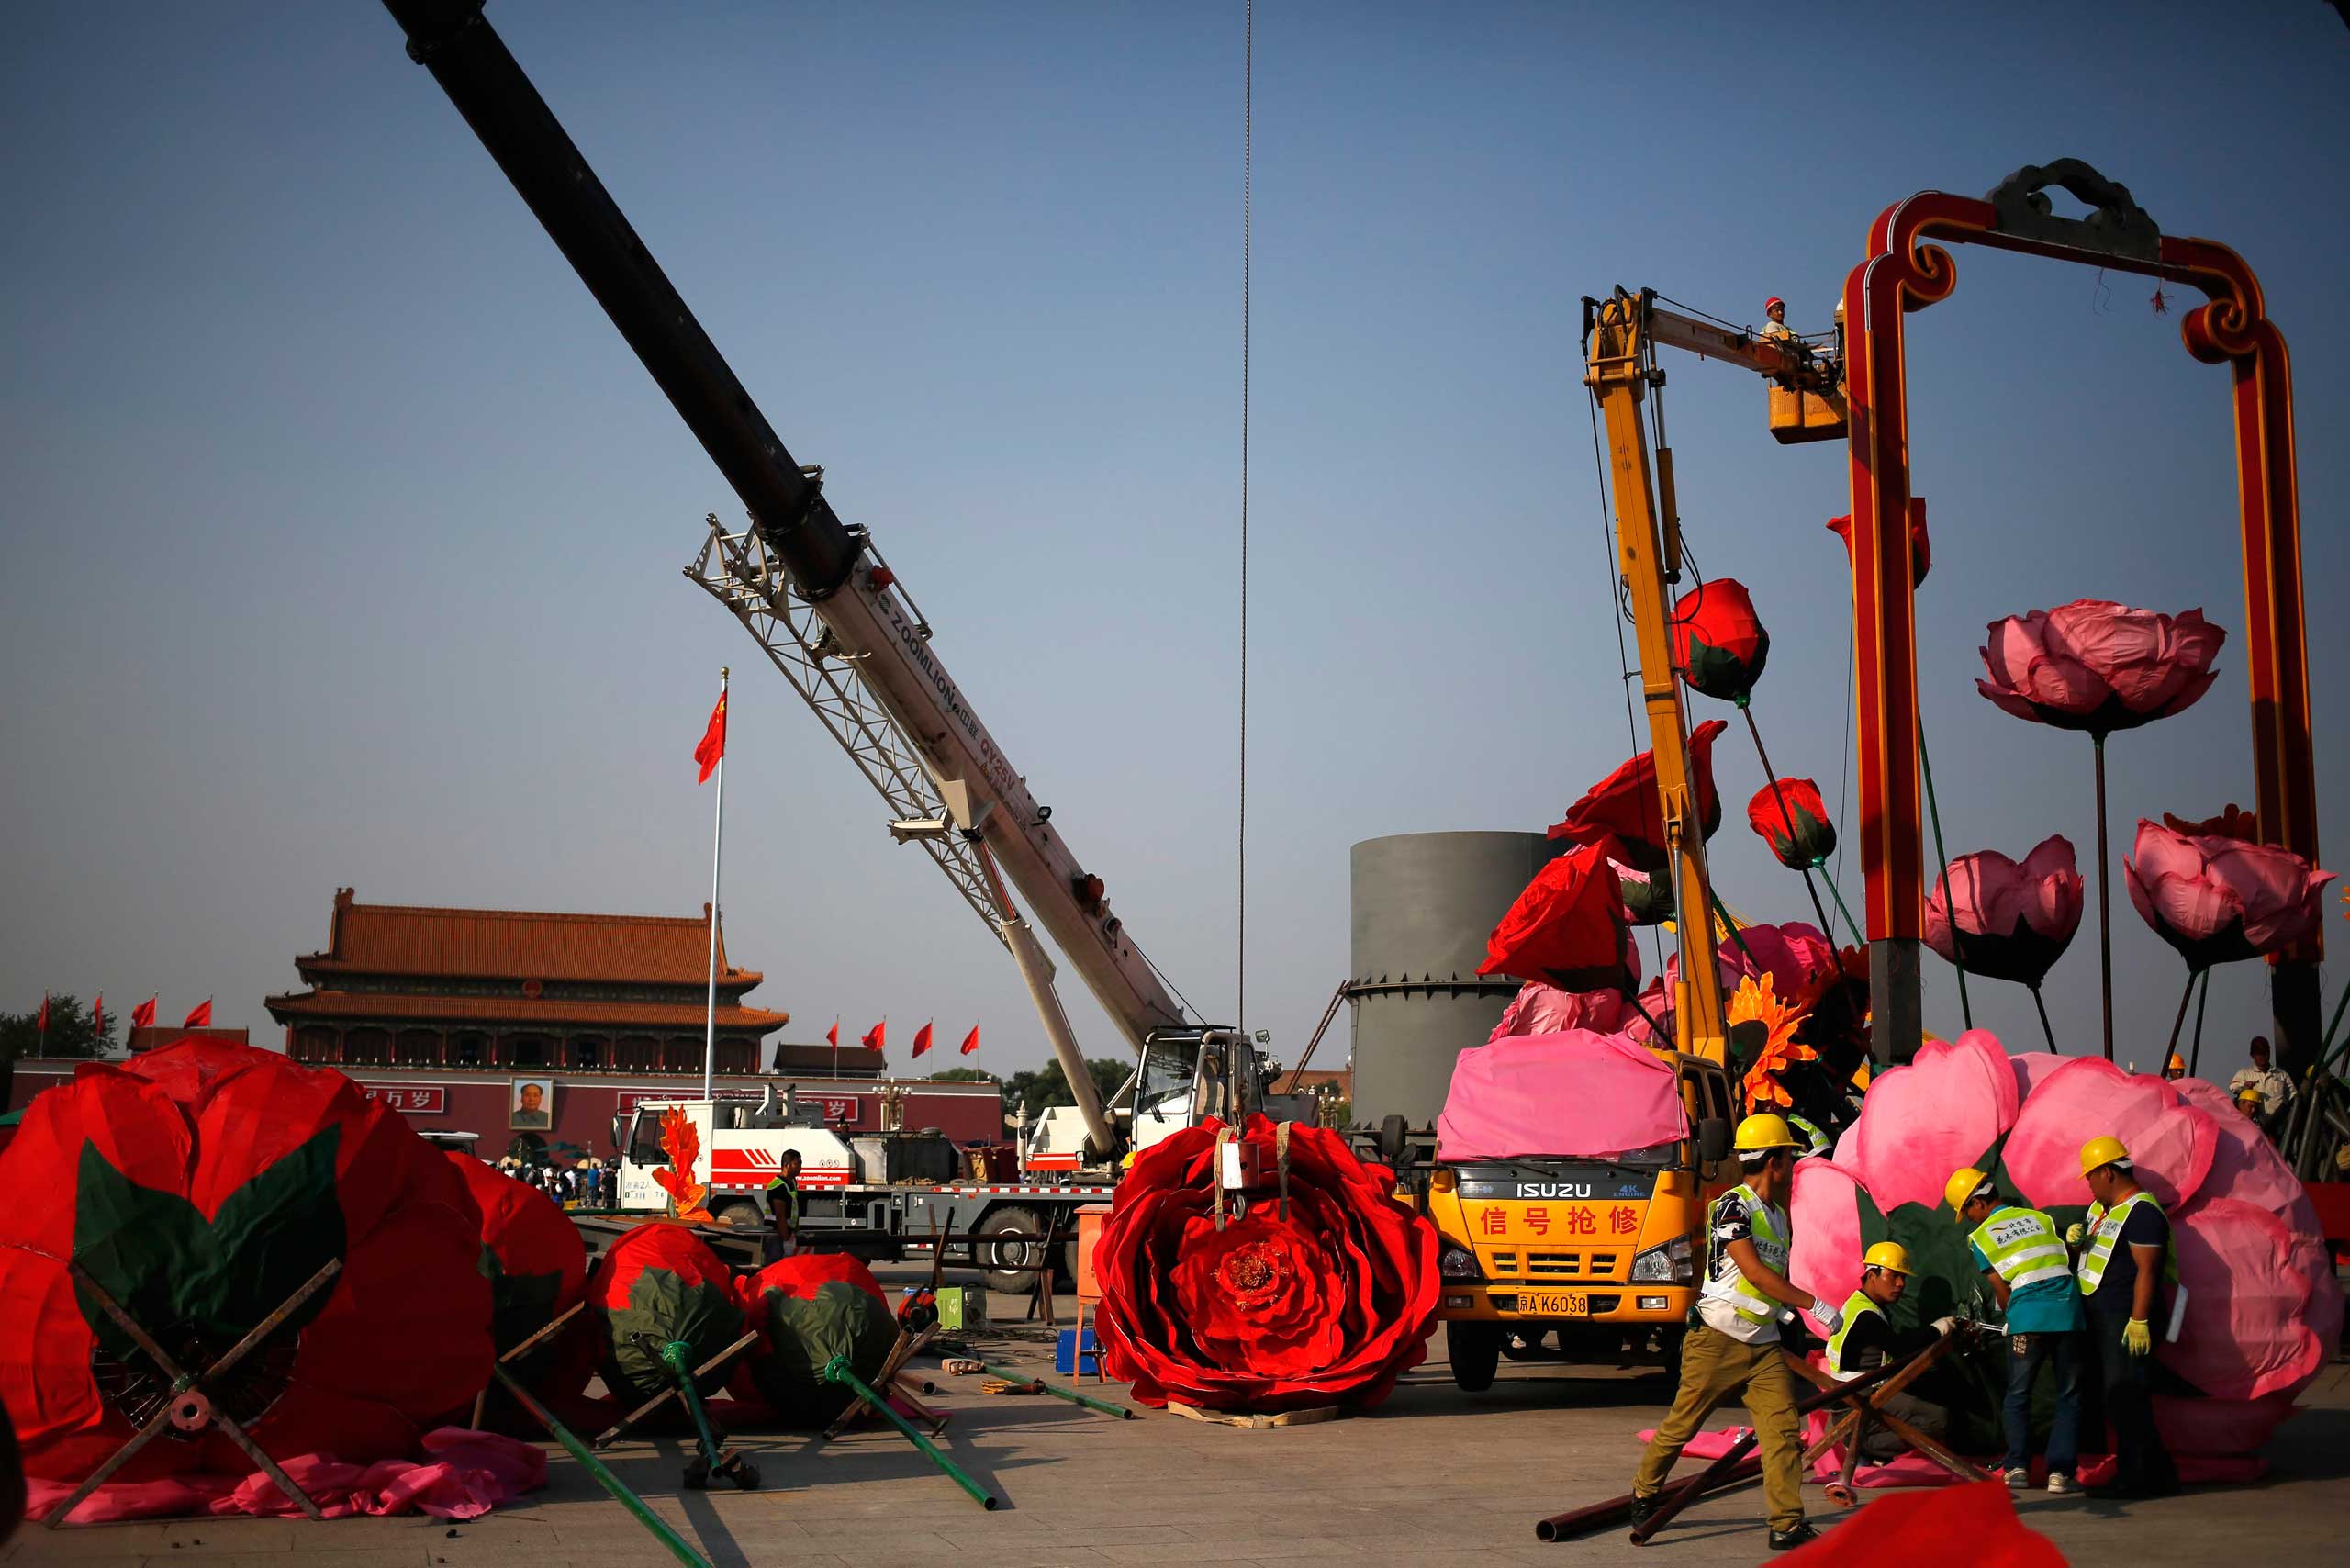 Sept. 18,  2014. Chinese workers set up giant decoration flowers in preparations for National Day at Tiananmen Square in Beijing.